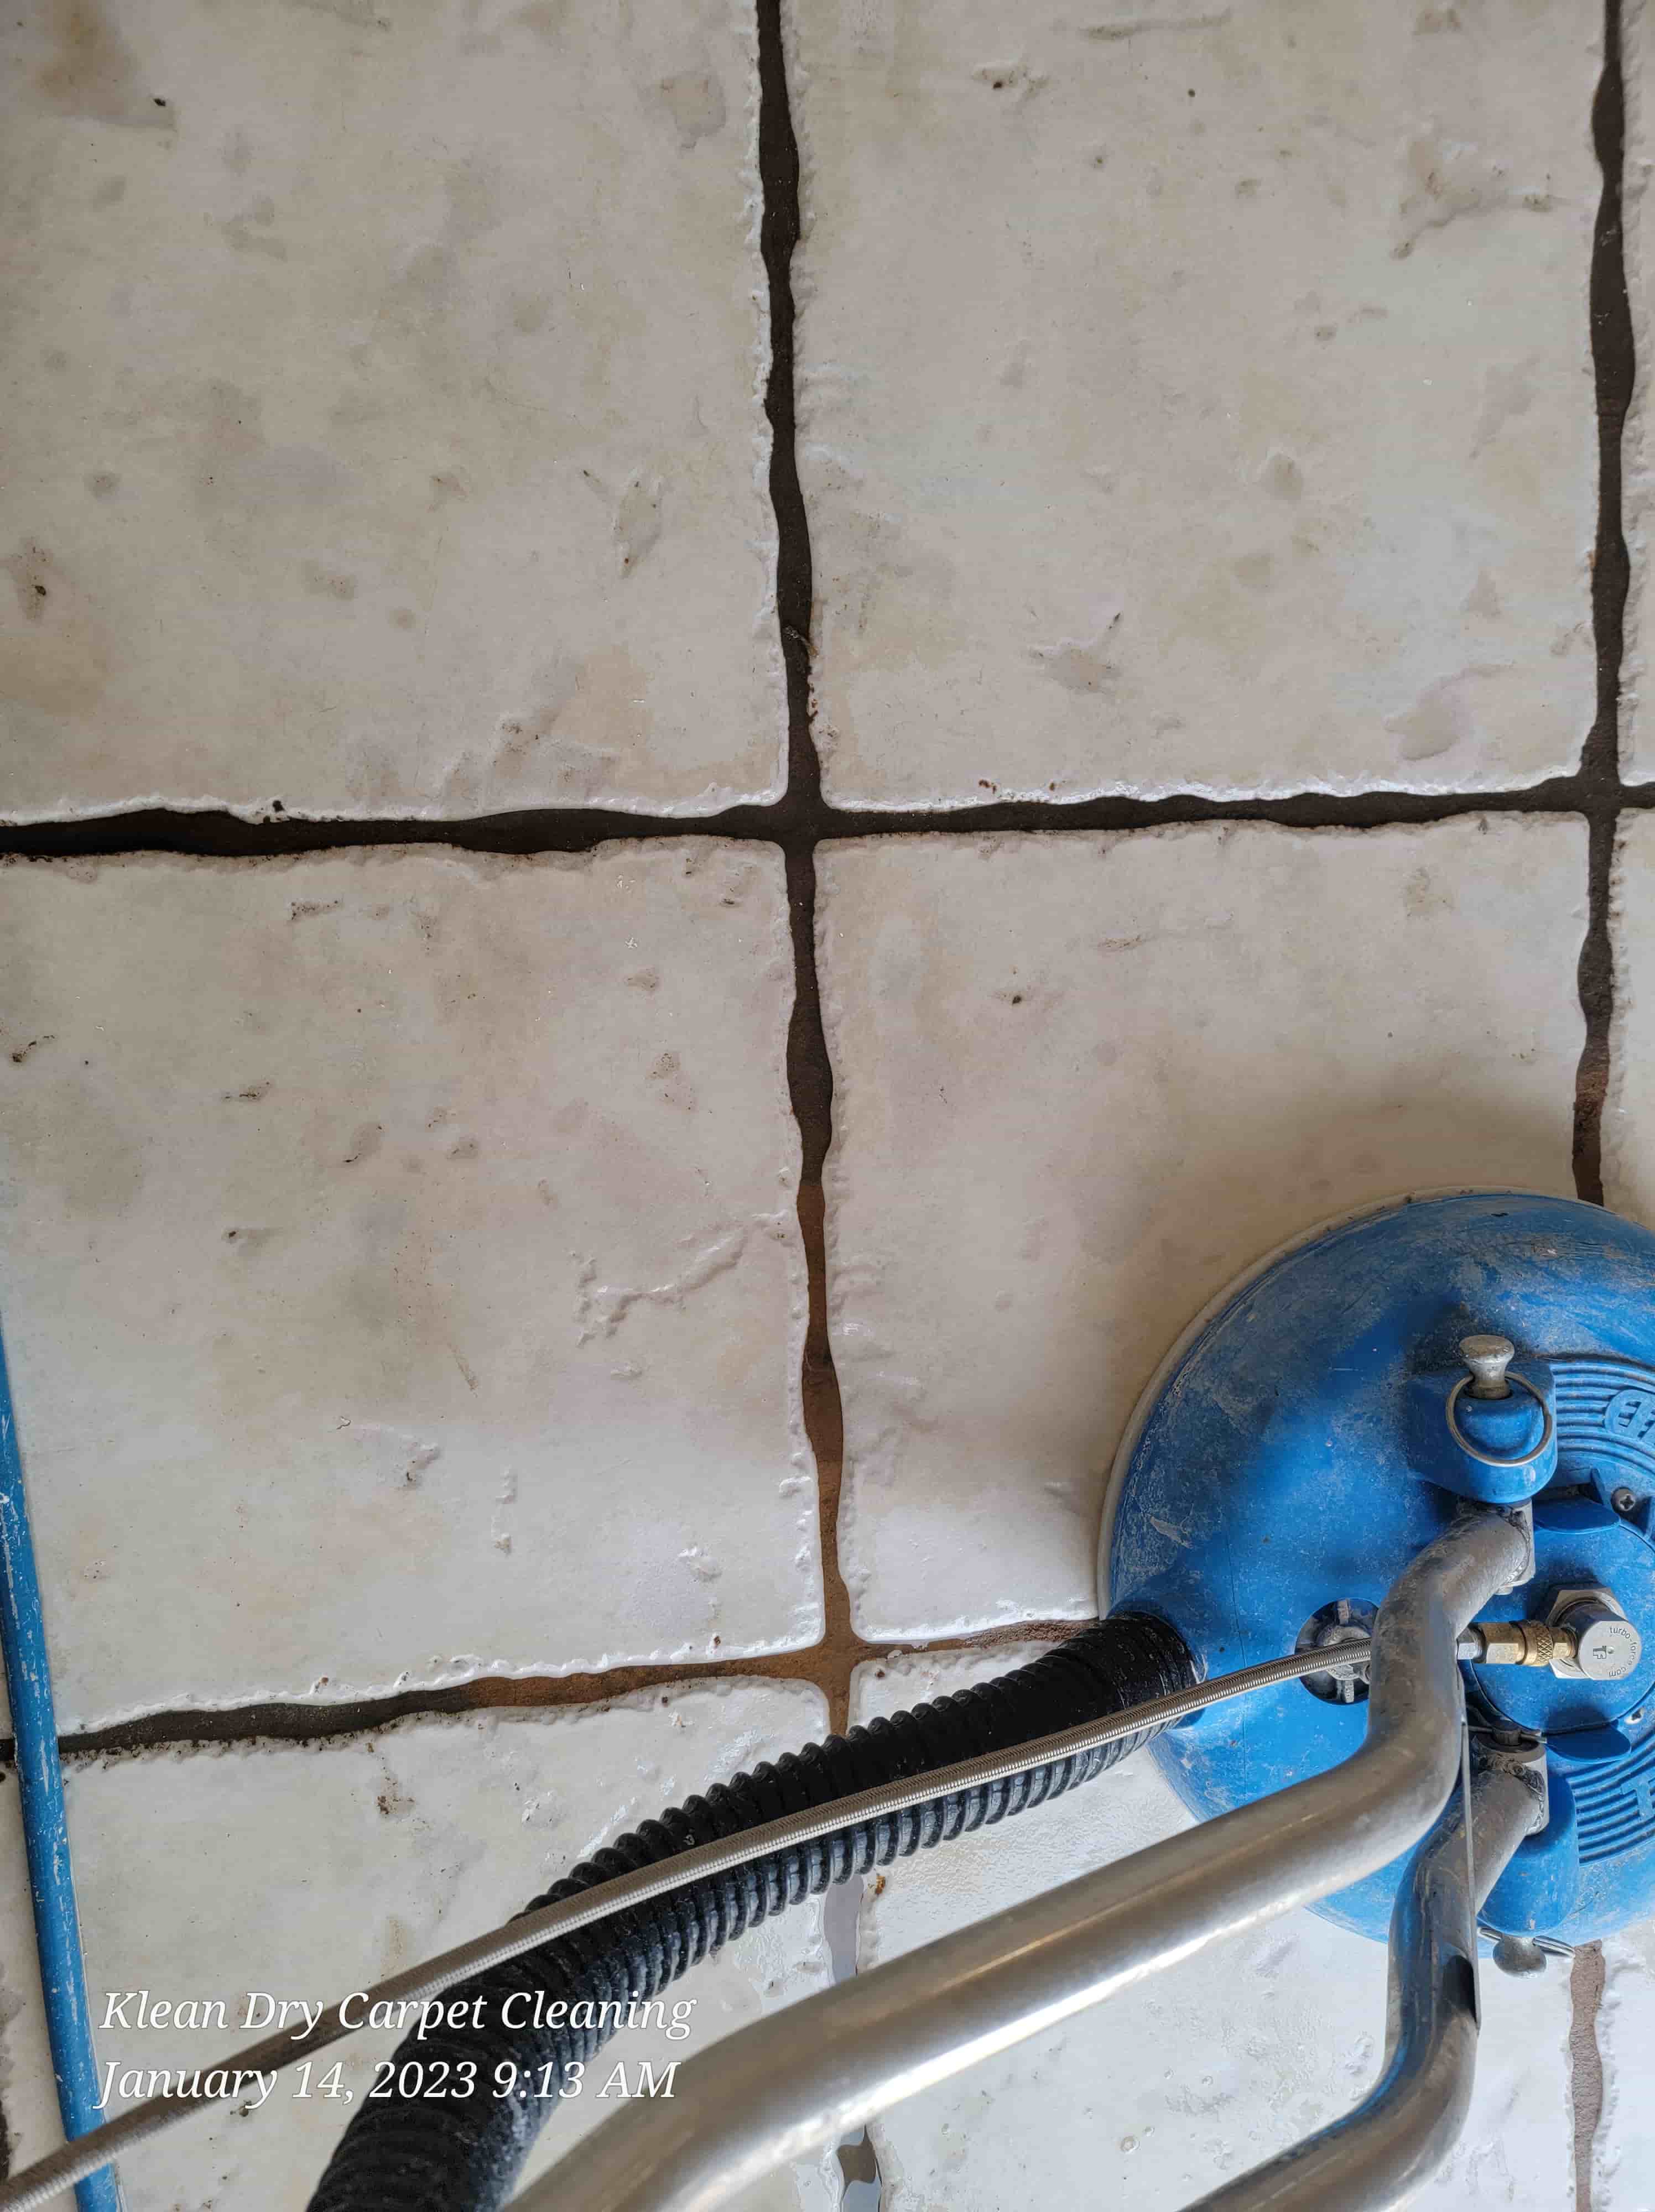 Professional tile and grout cleaning Rio Rancho, NM